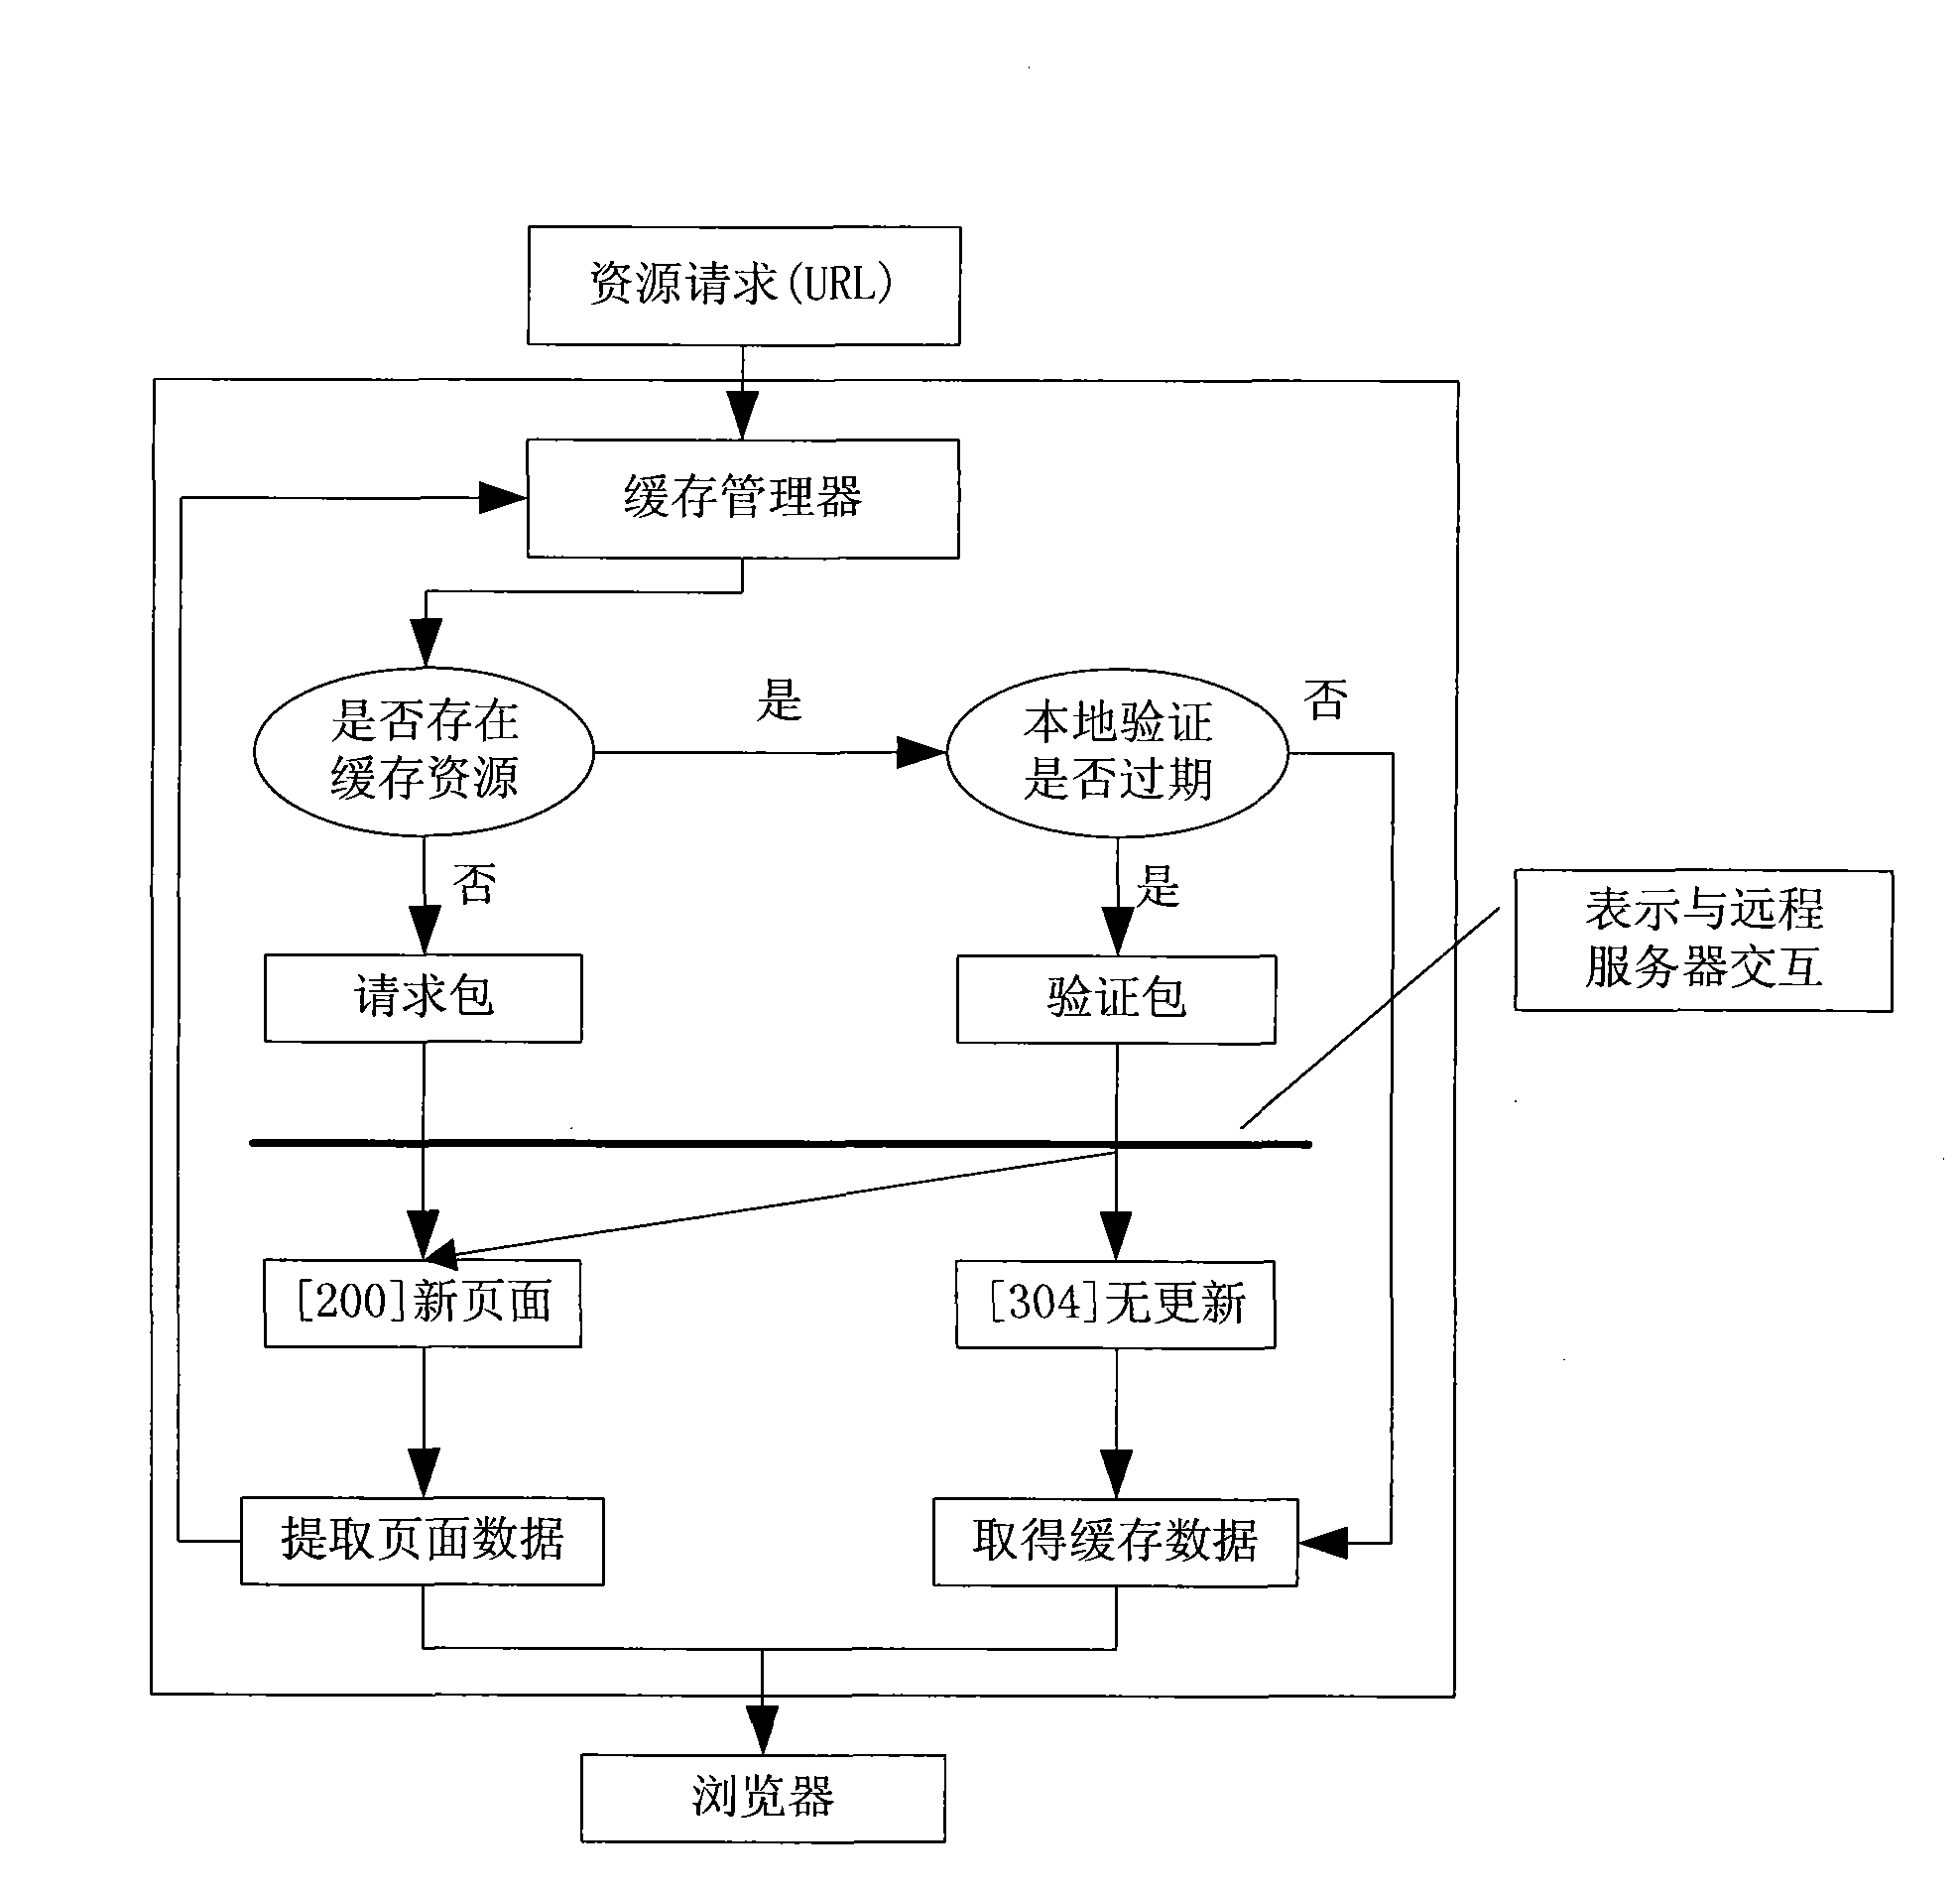 Device and method for accelerating display of web page of browser